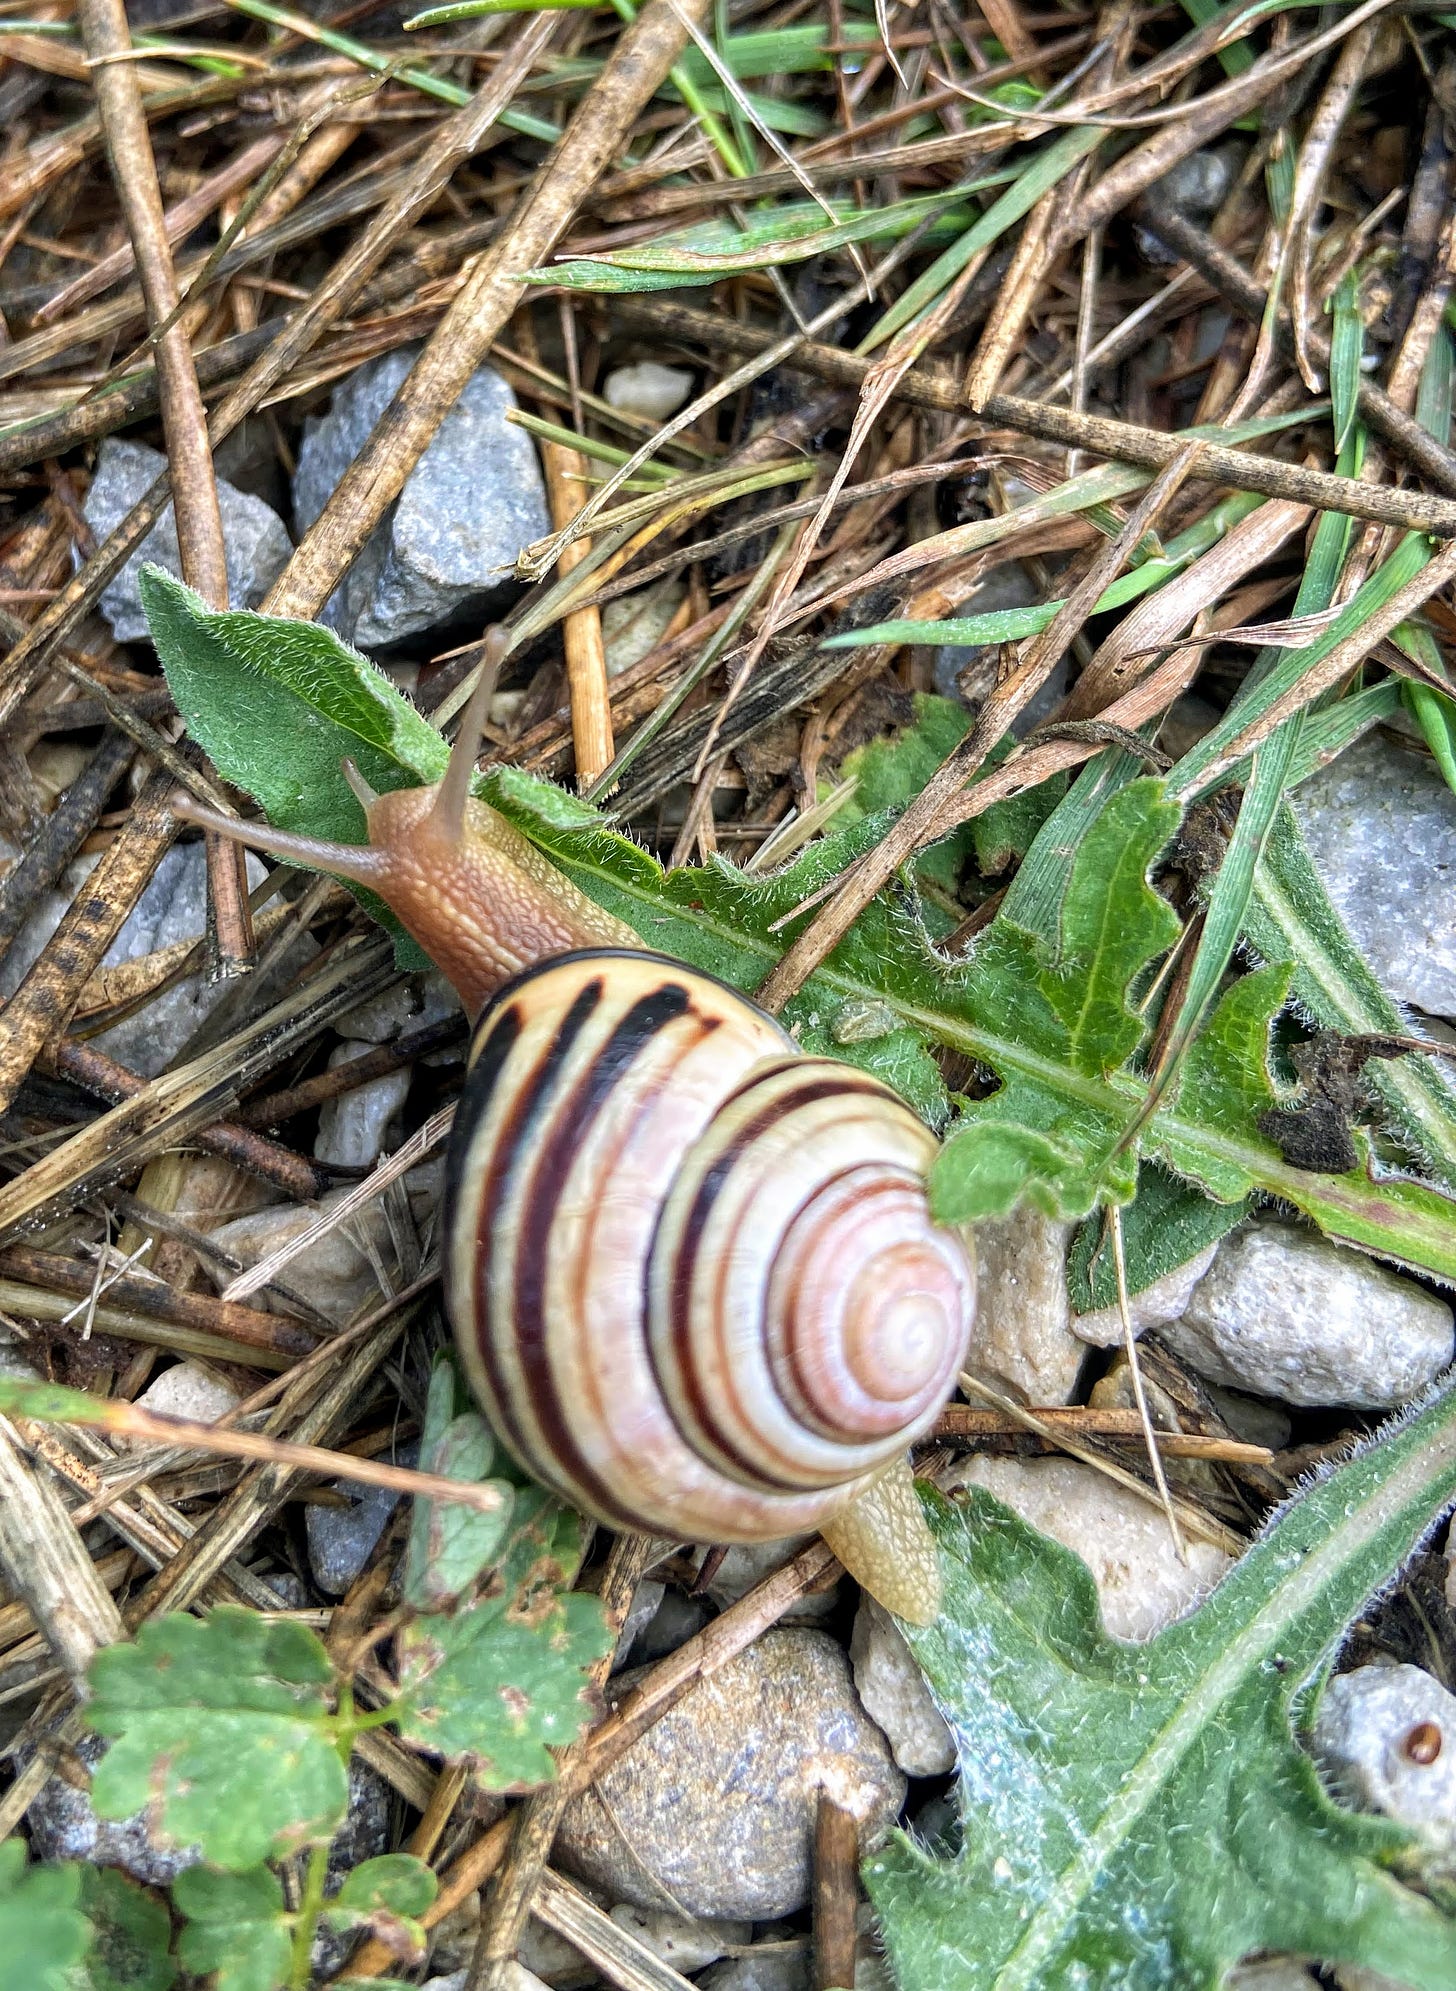 Snail amid leaves and branches